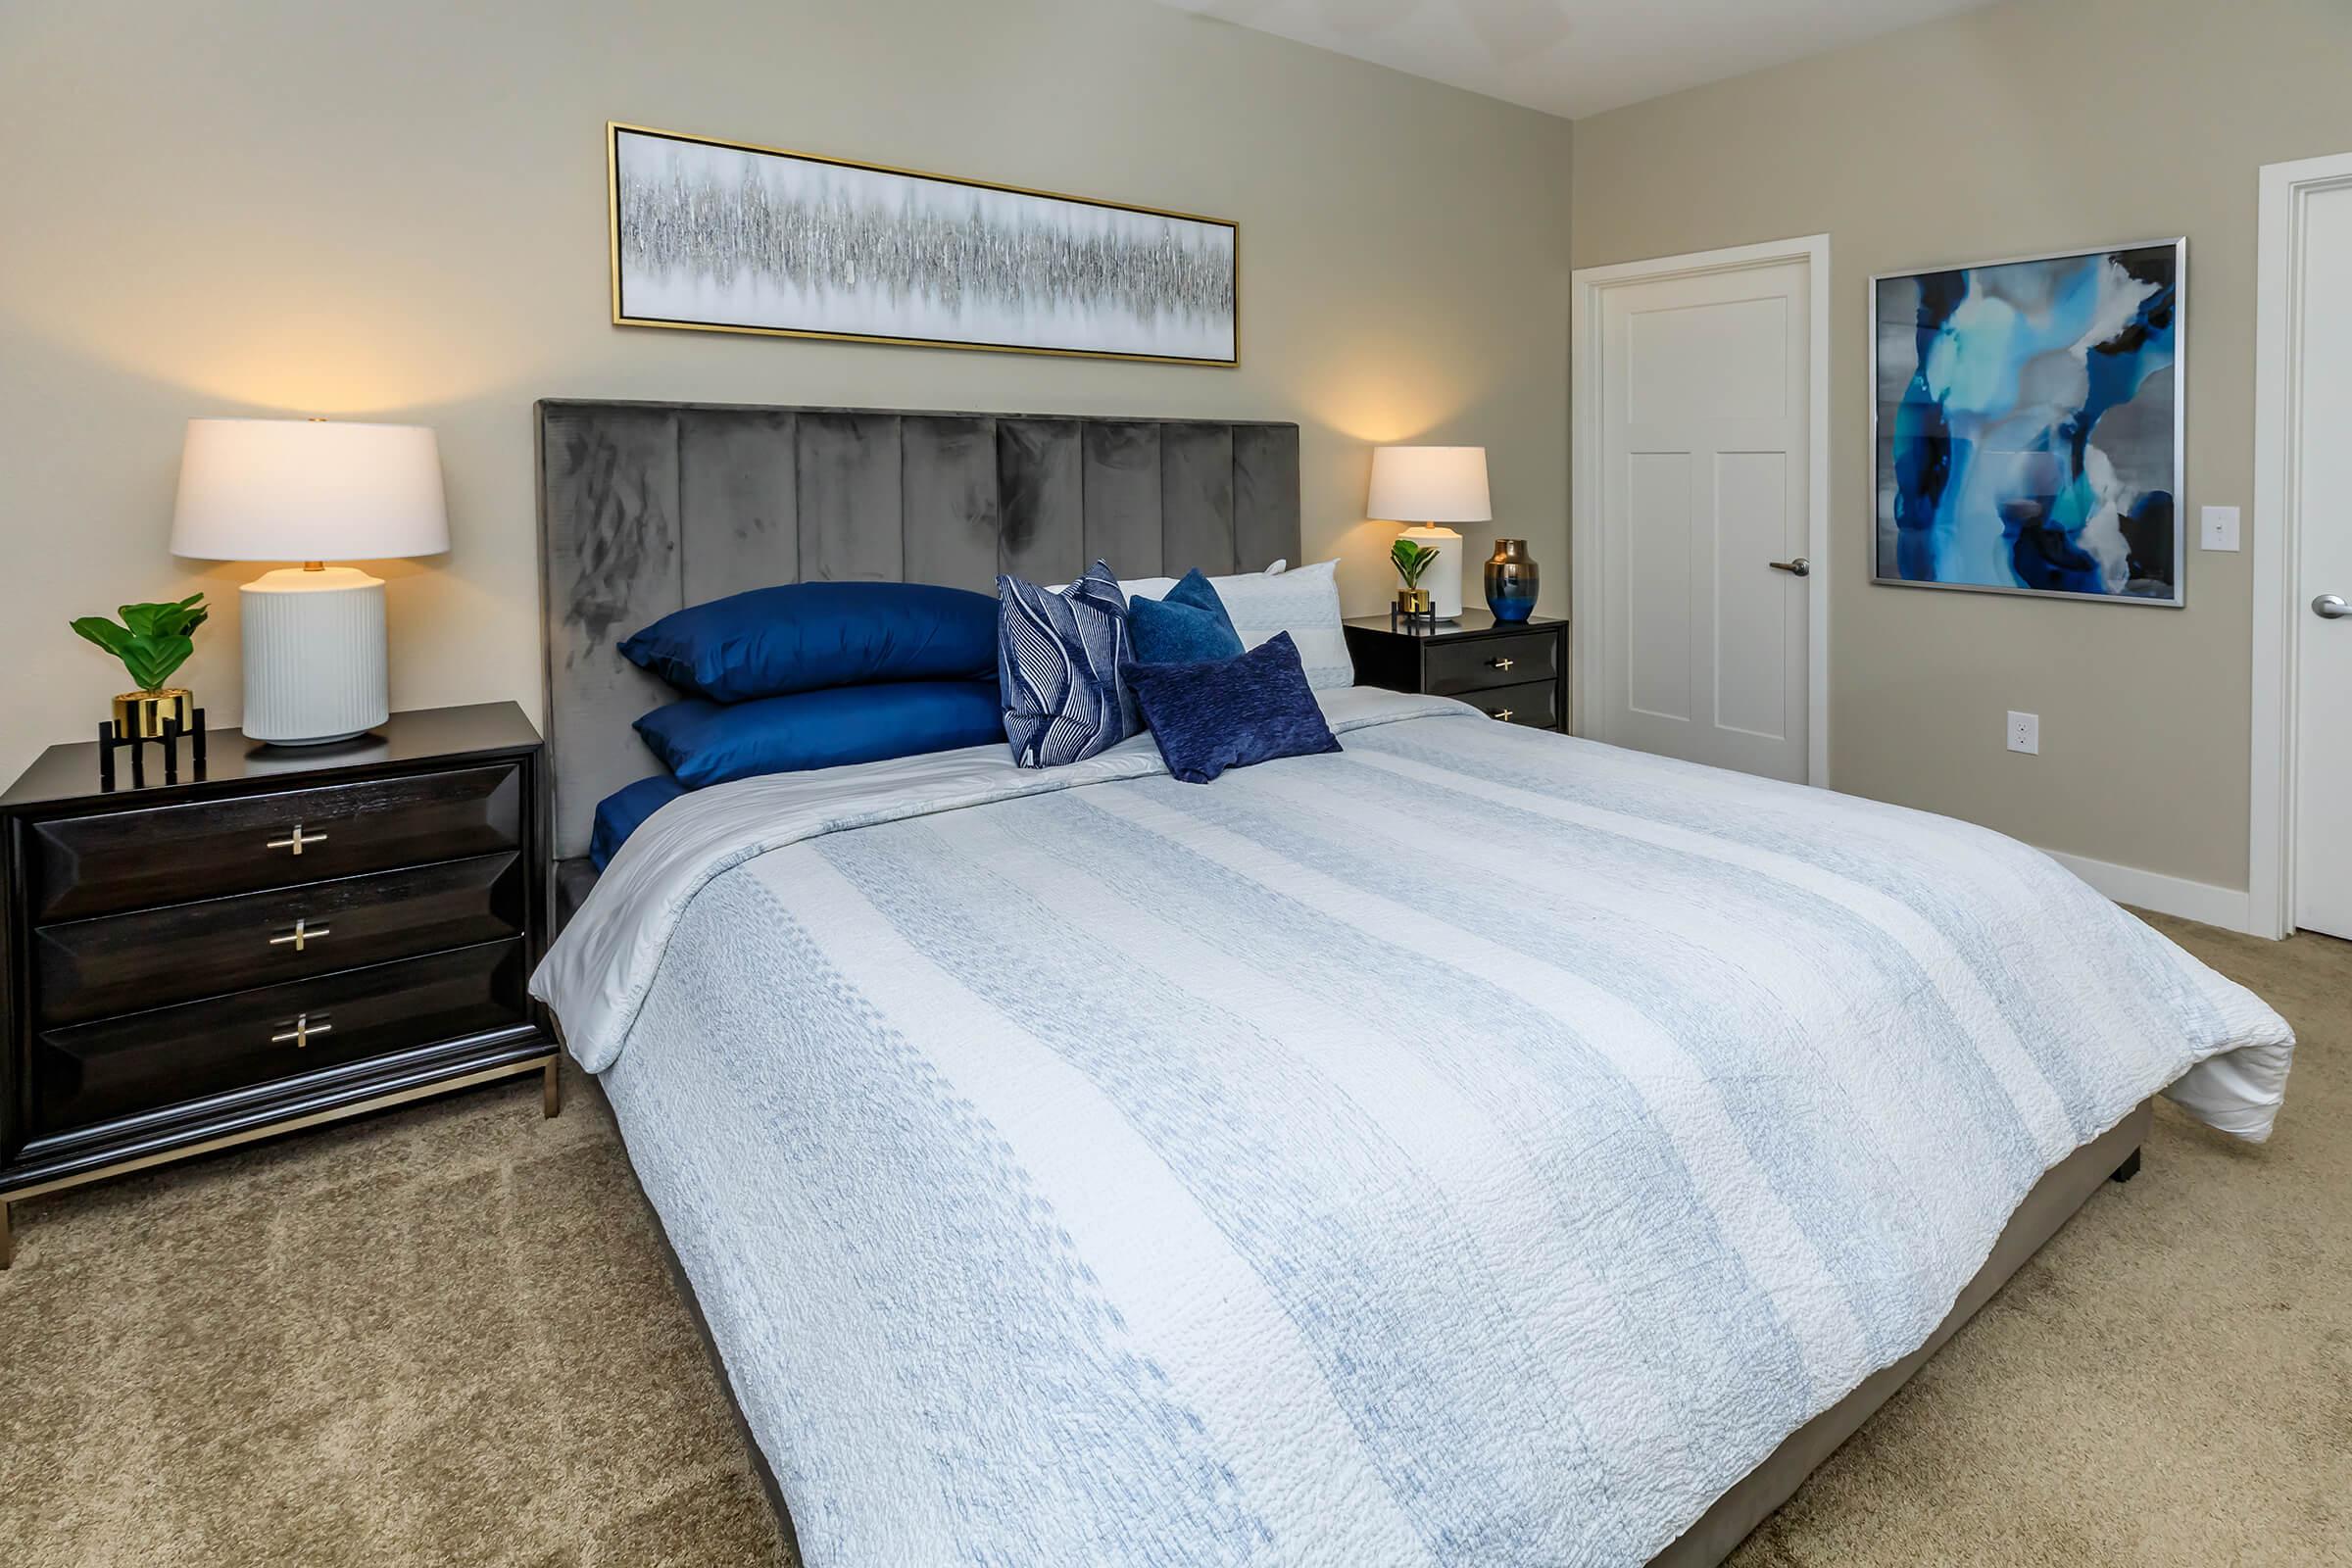 Bedroom with blue pillows